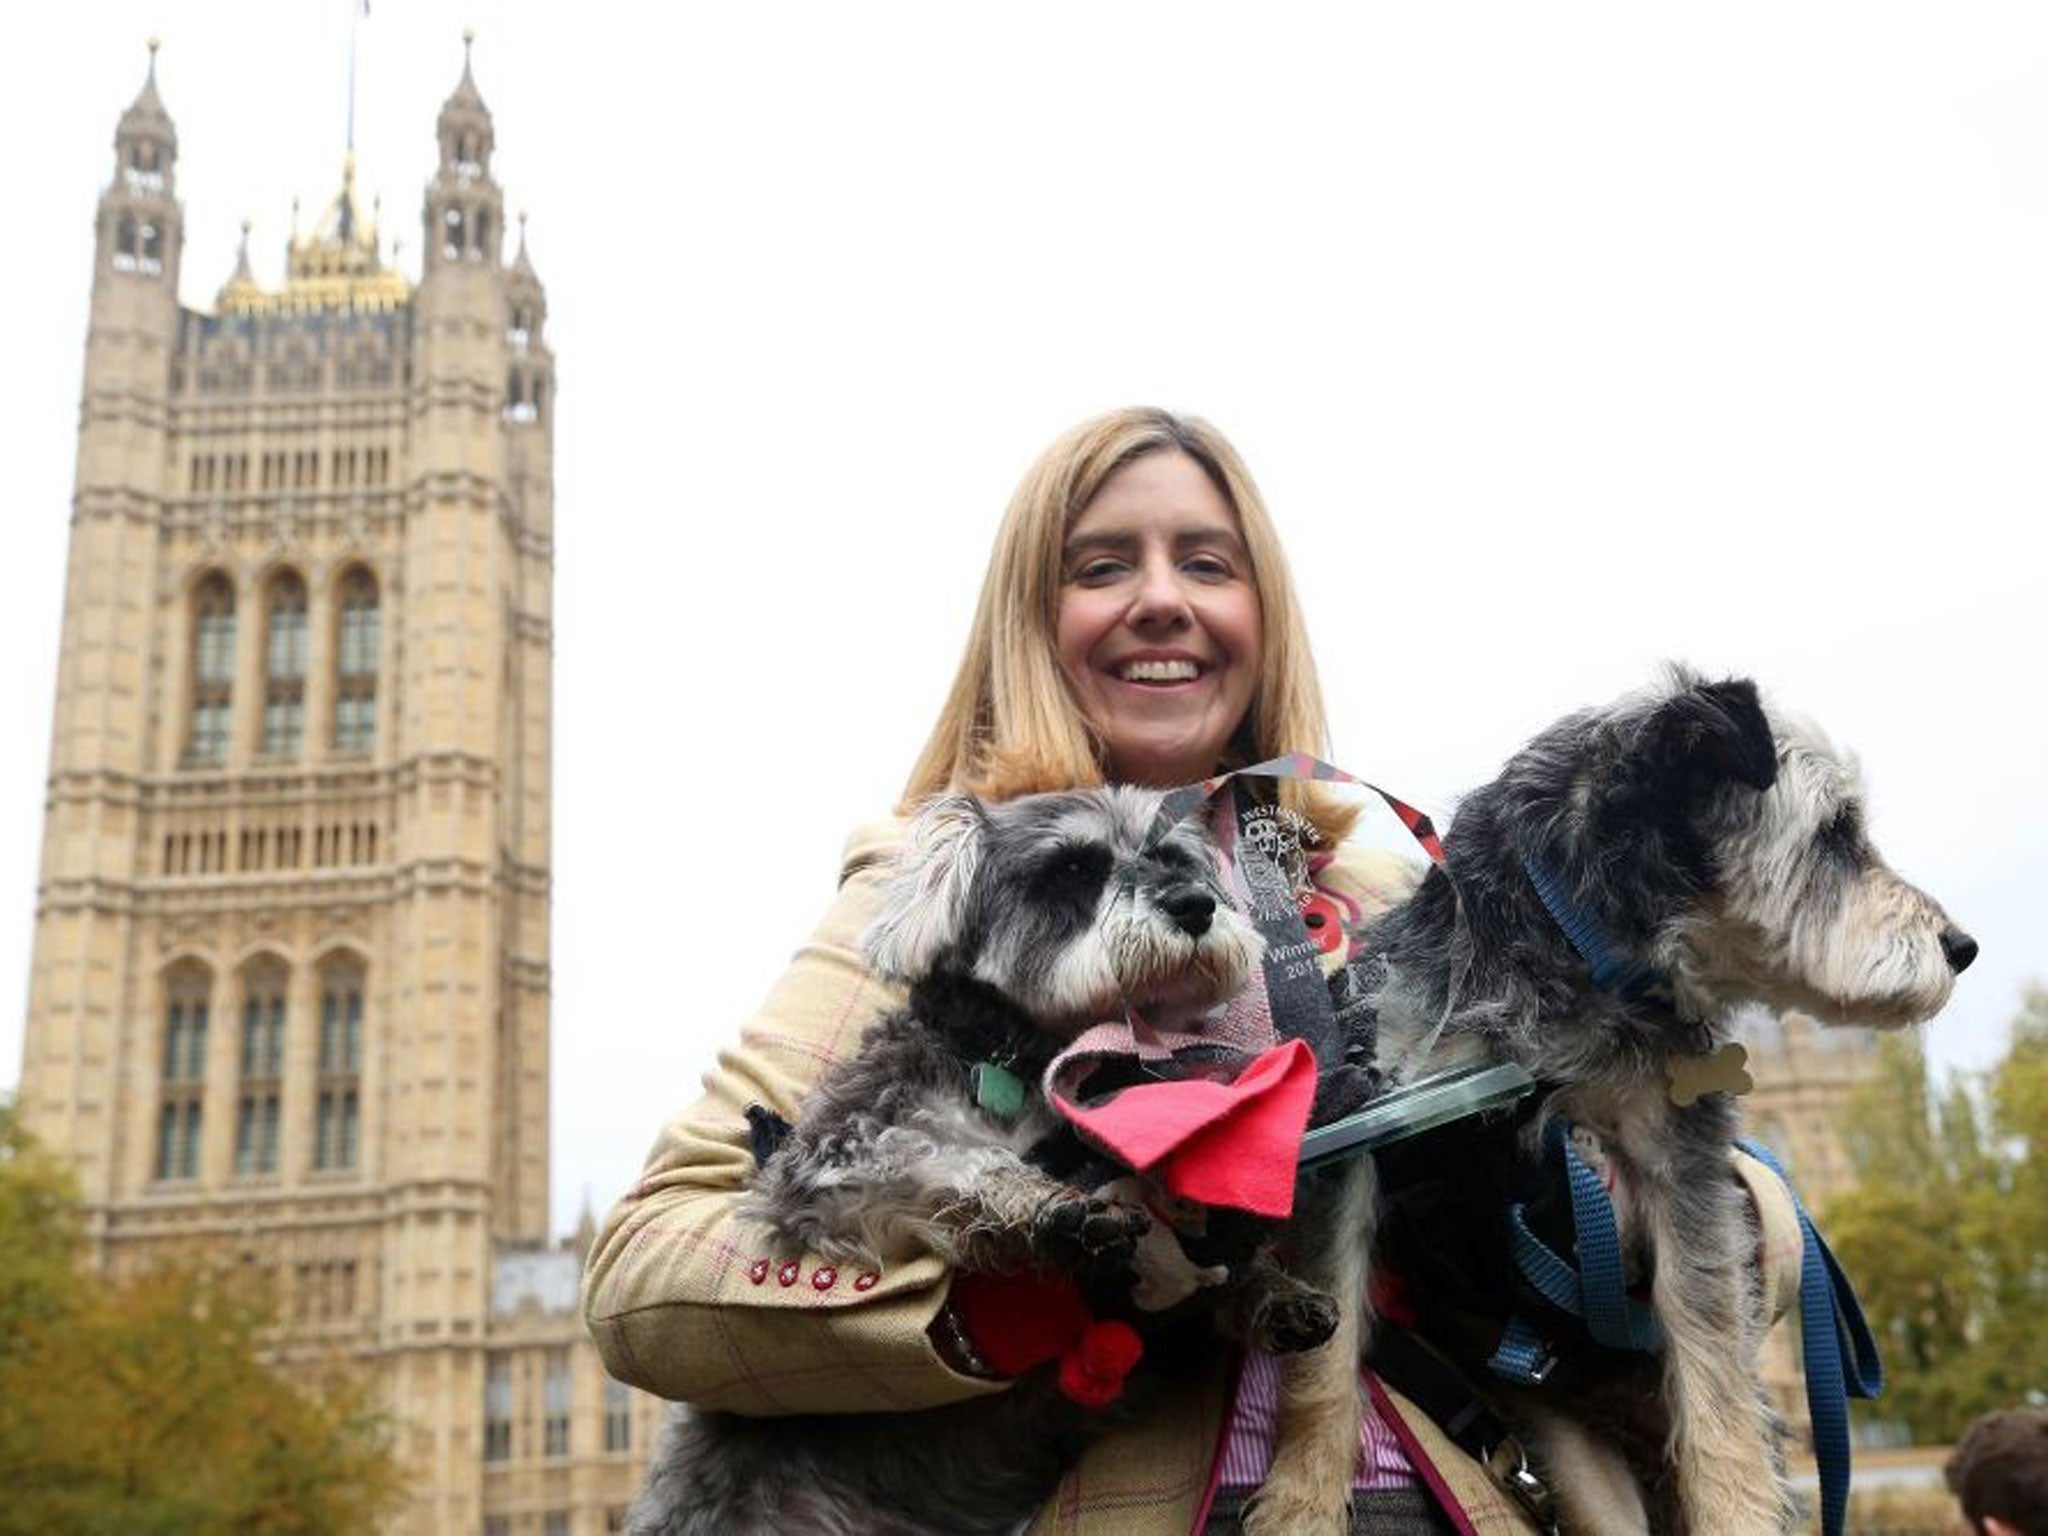 Miniature Schnauzers Godiva (left) and Lady (right) with their owner Andrea Jenkyns MP